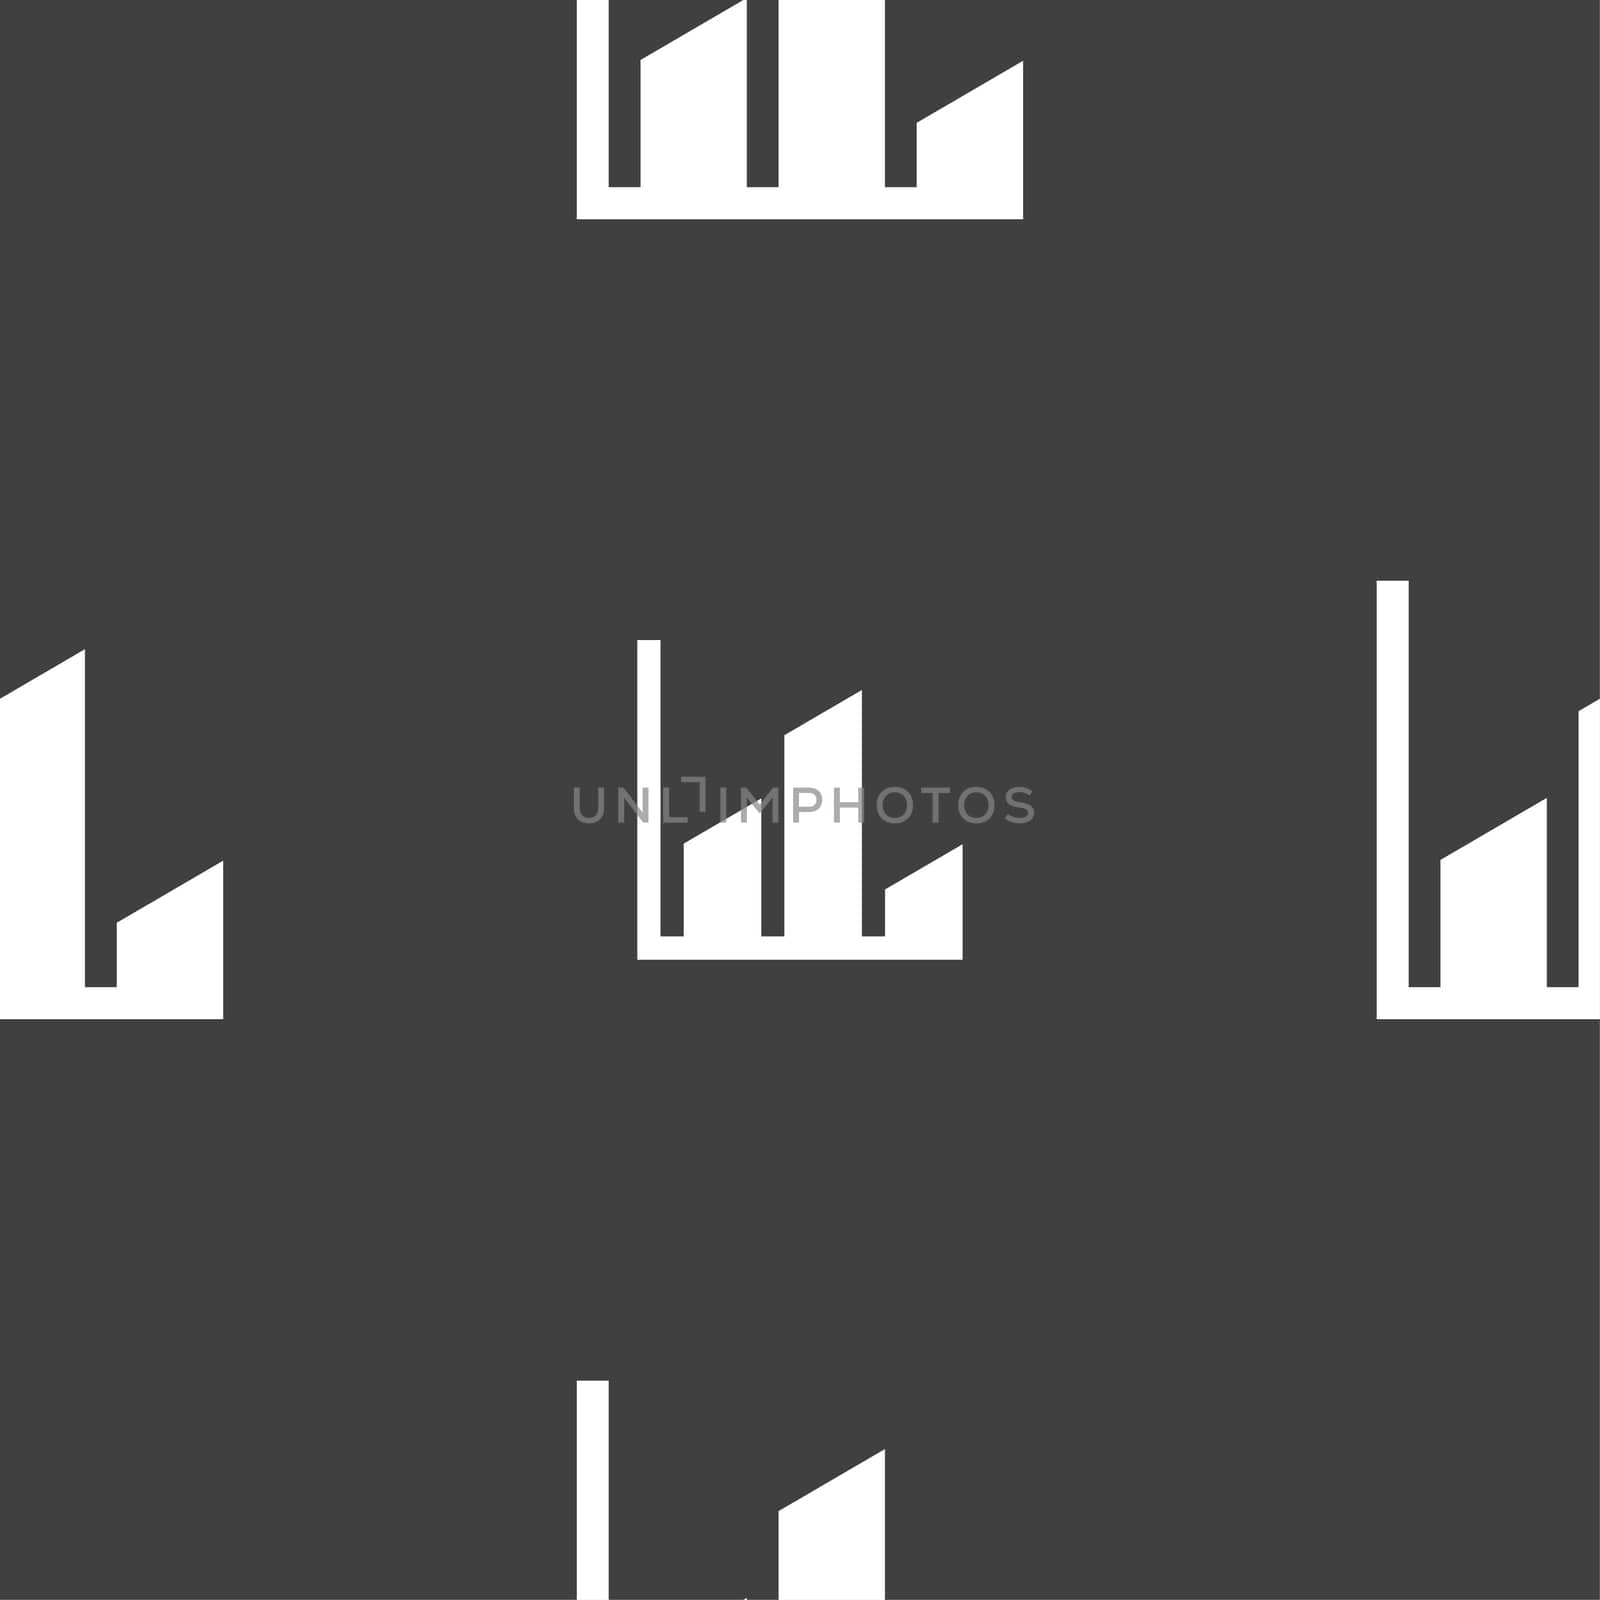 Chart icon sign. Seamless pattern on a gray background. illustration